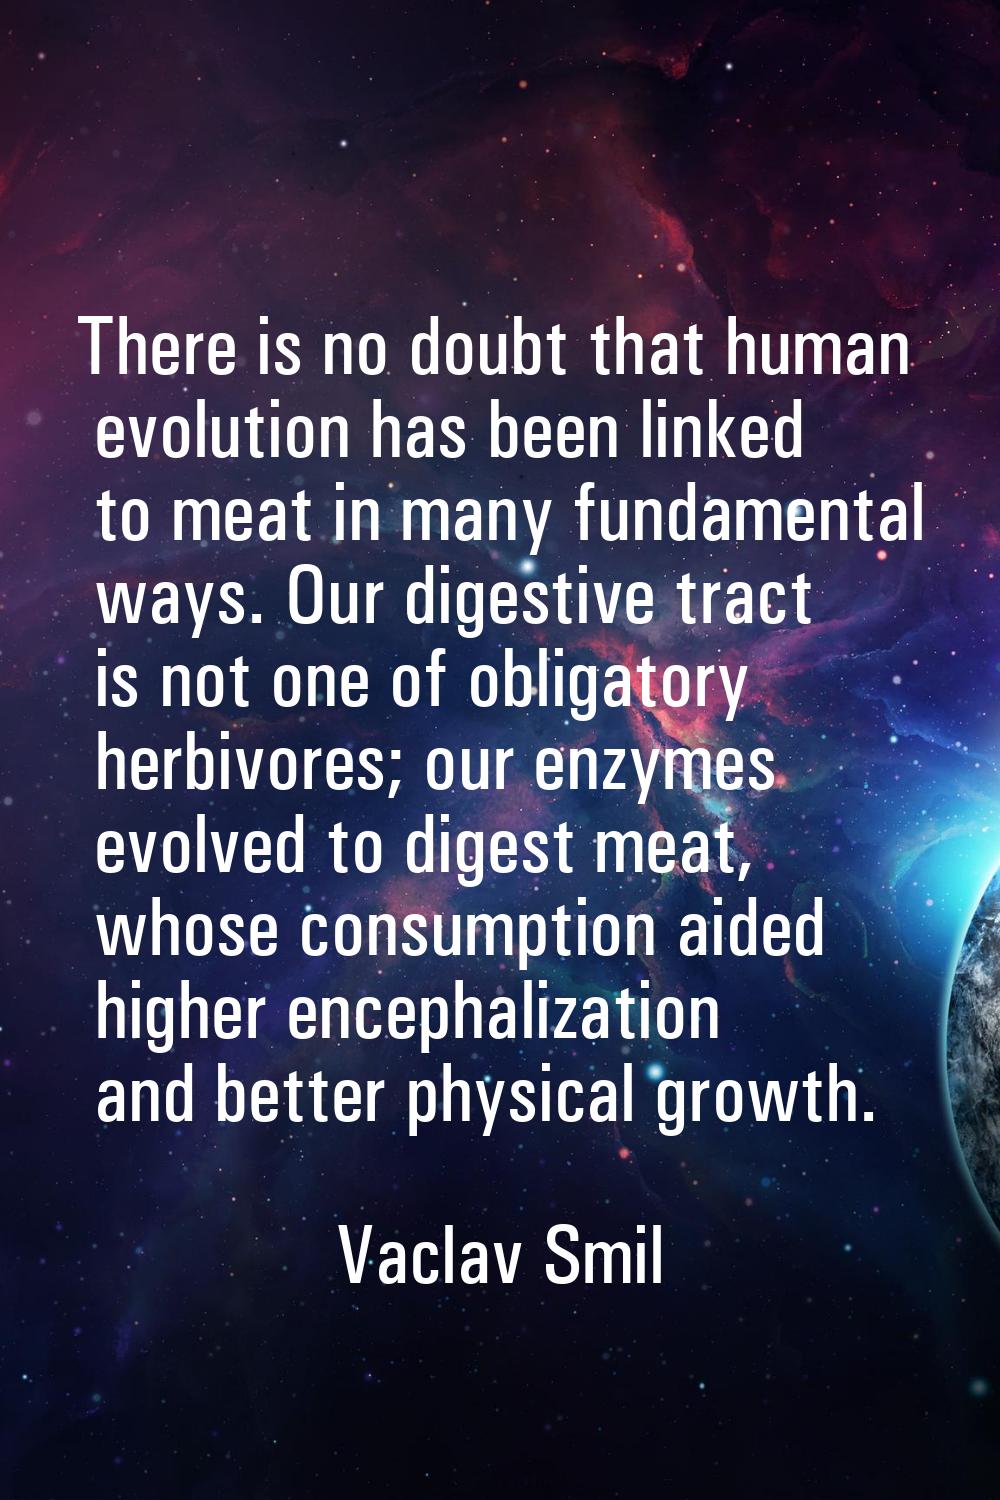 There is no doubt that human evolution has been linked to meat in many fundamental ways. Our digest